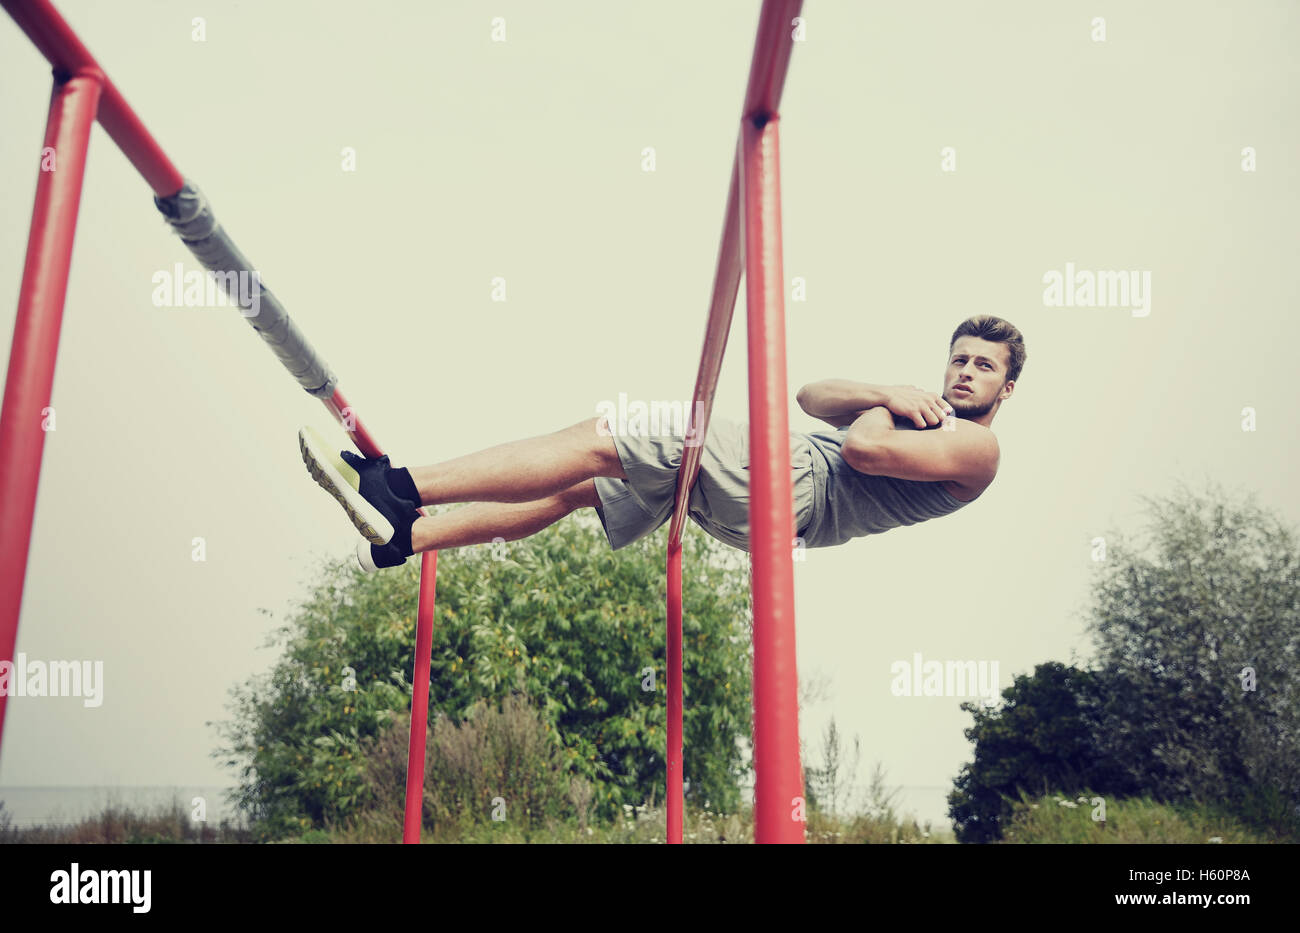 young man doing sit up on parallel bars outdoors Stock Photo